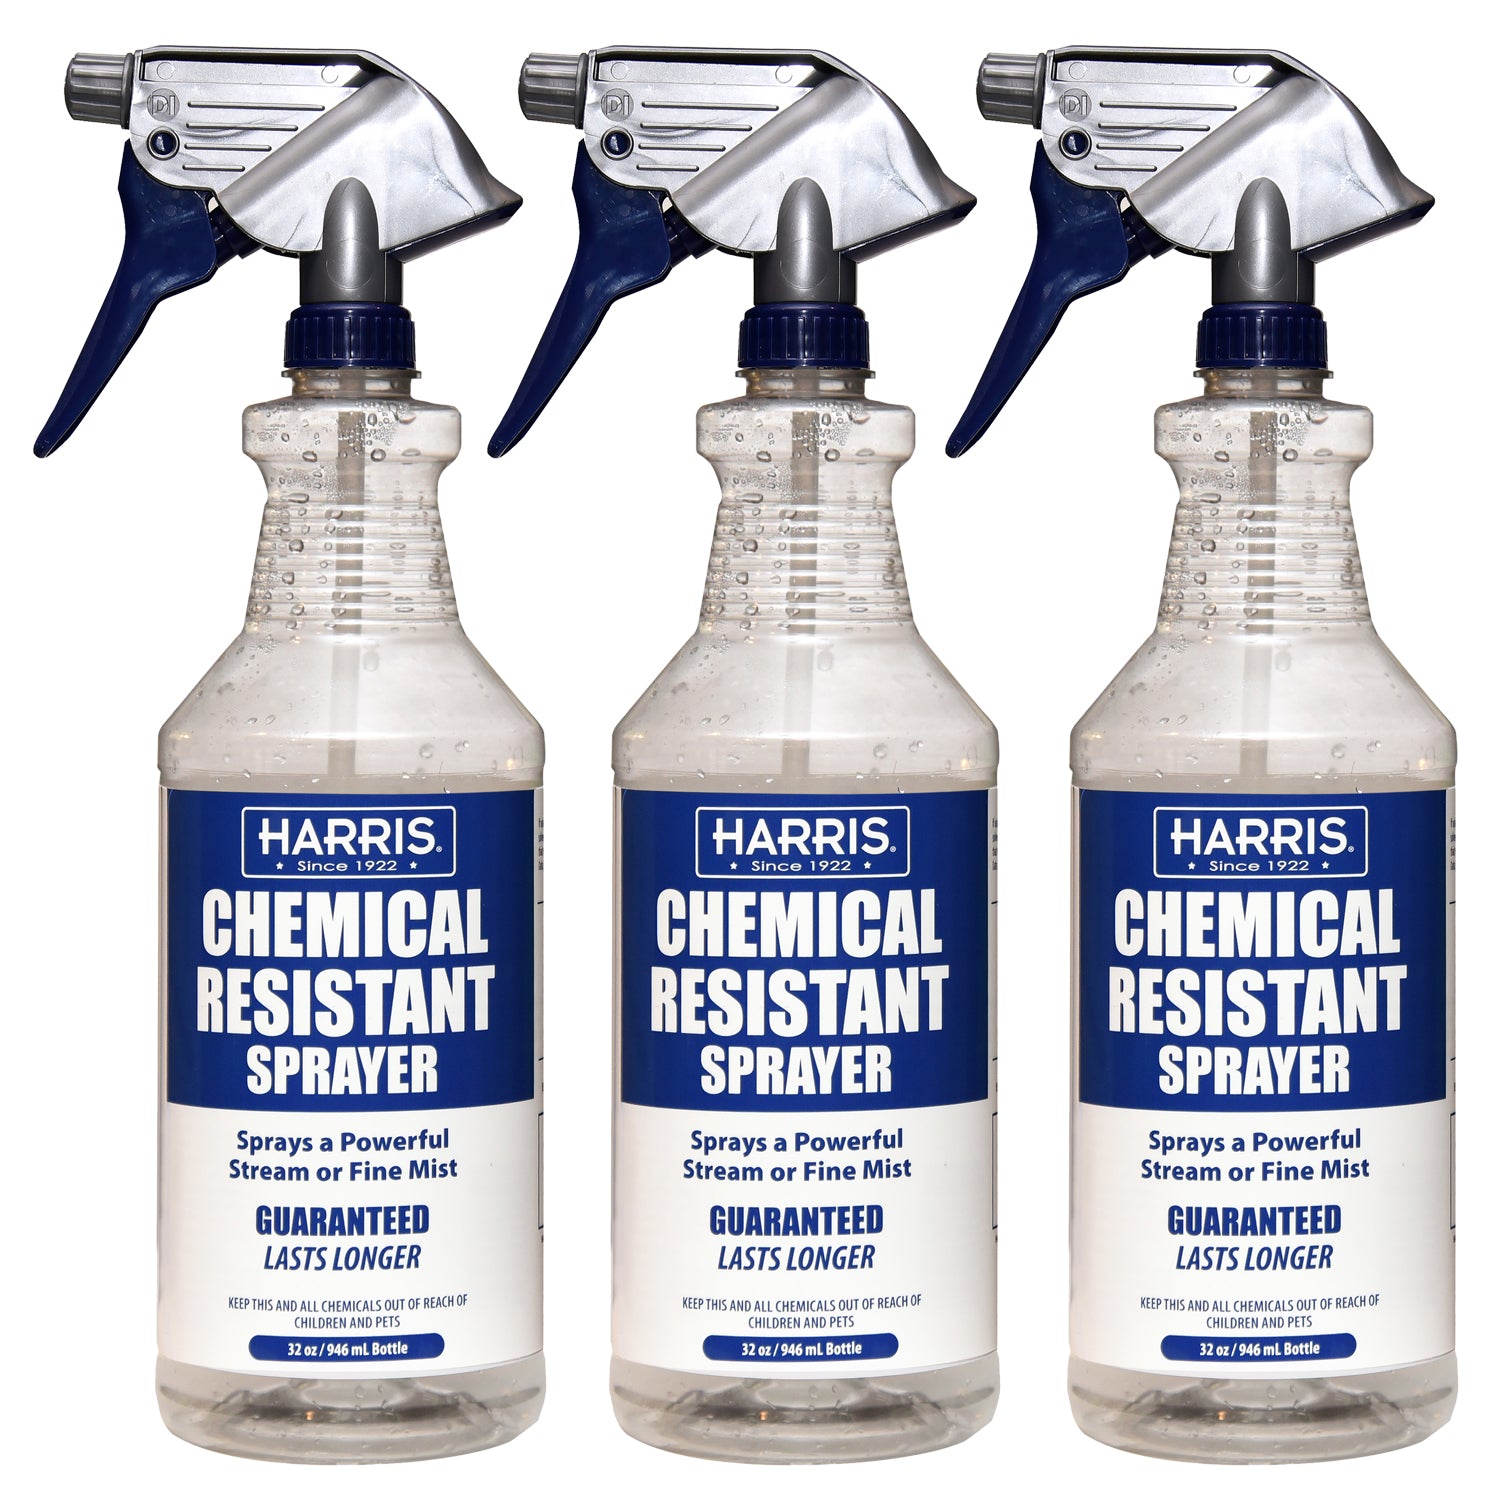  HARRIS Chemically Resistant Professional Spray Bottle